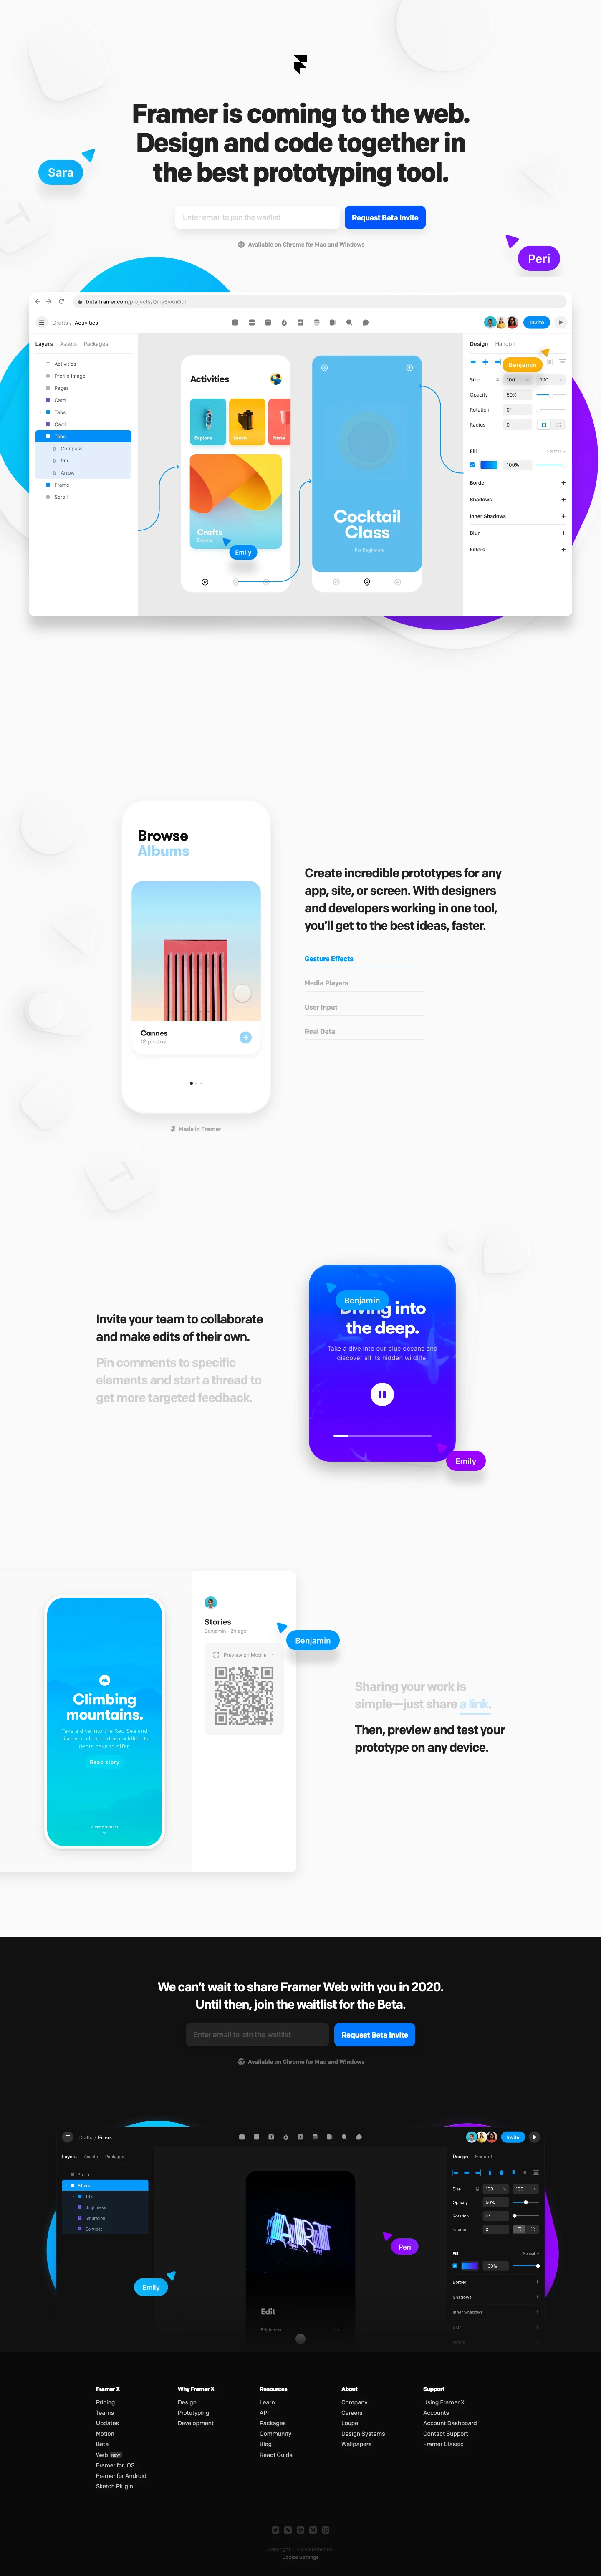 Framer Web Landing Page Example: Framer is coming to the web. Design and code together in the best prototyping tool.